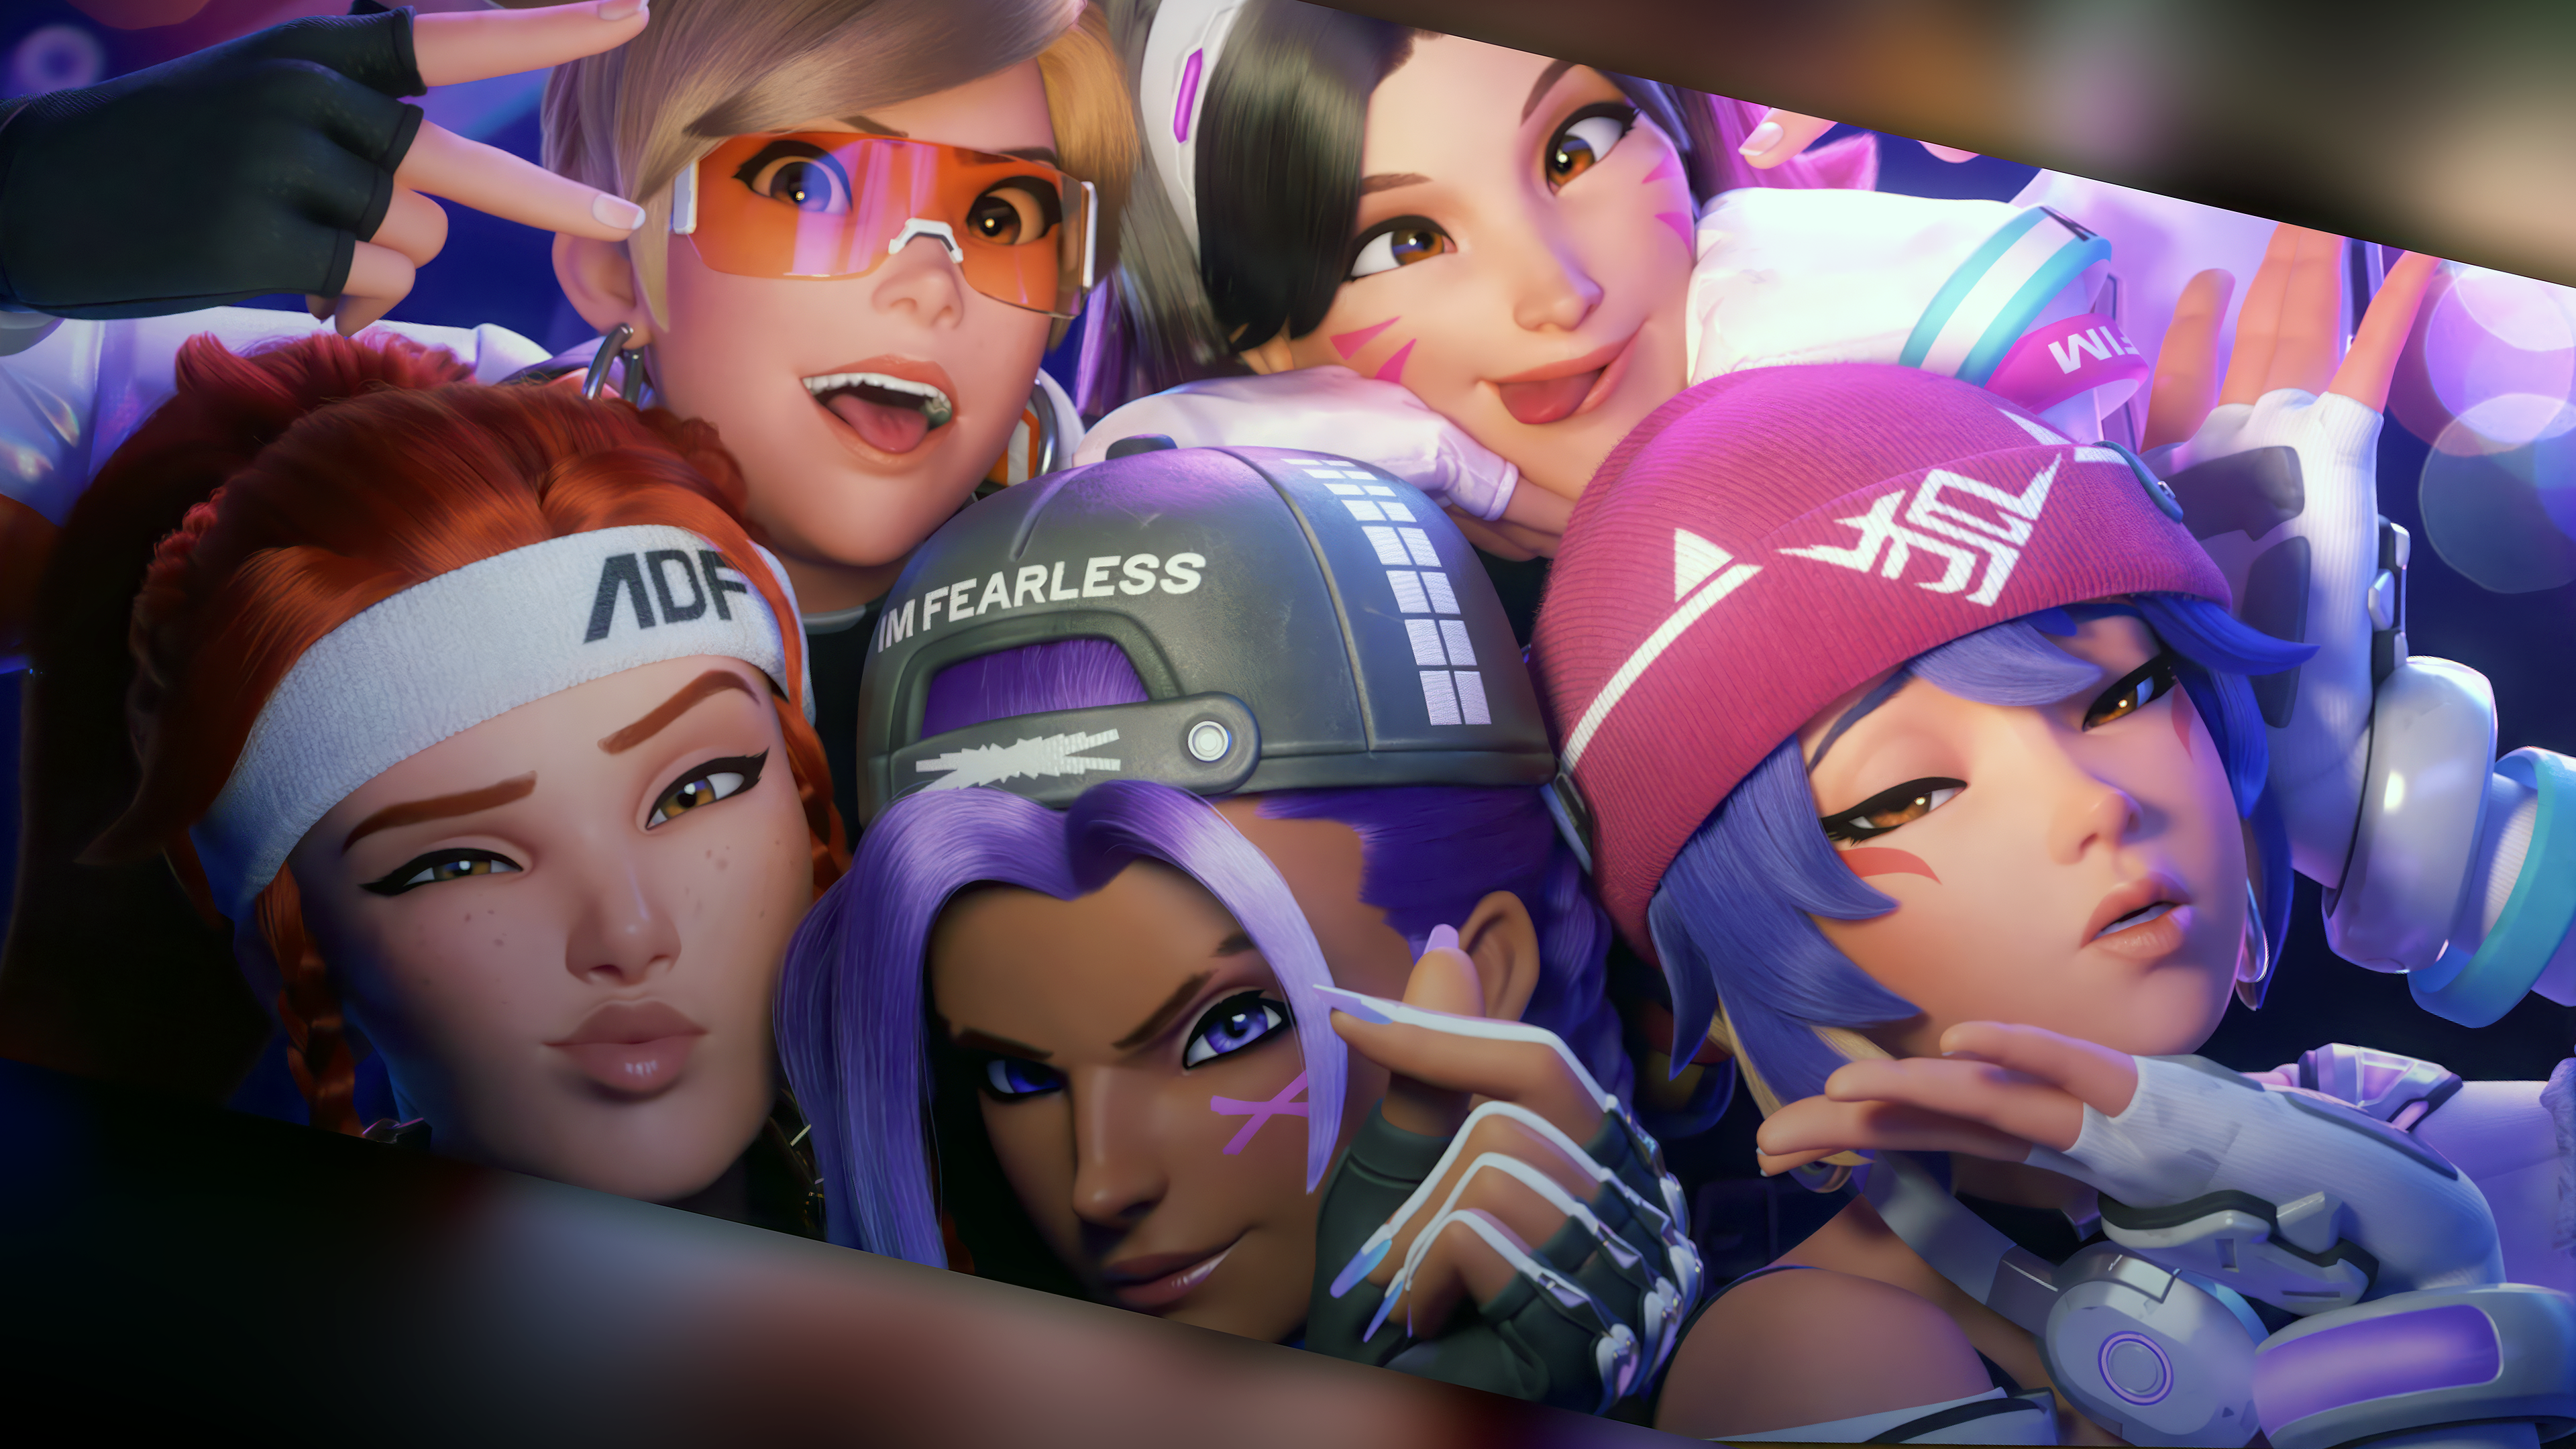 General 3840x2160 Activision photoshopped CGI video game characters peace sign video games looking at viewer hat tongue out smiling video game art earring people Overwatch Kiriko (Overwatch) 4K Brigitte (Overwatch) Tracer (Overwatch) D.Va (Overwatch) Sombra (Overwatch) Blizzard Entertainment